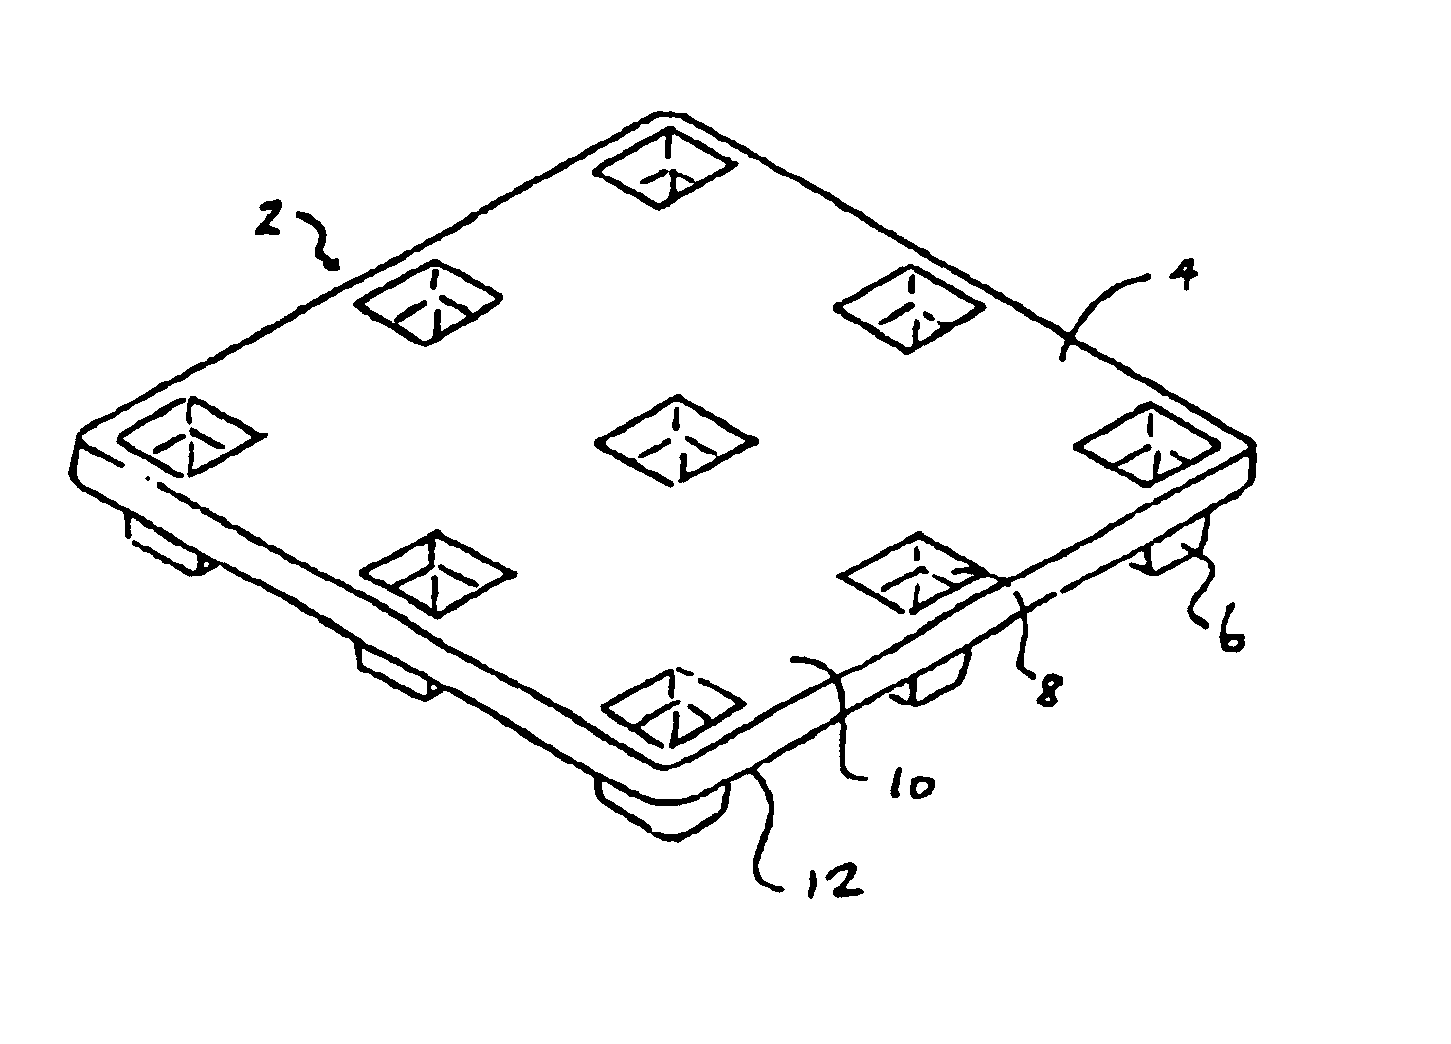 Thermoformed apparatus having a communications device